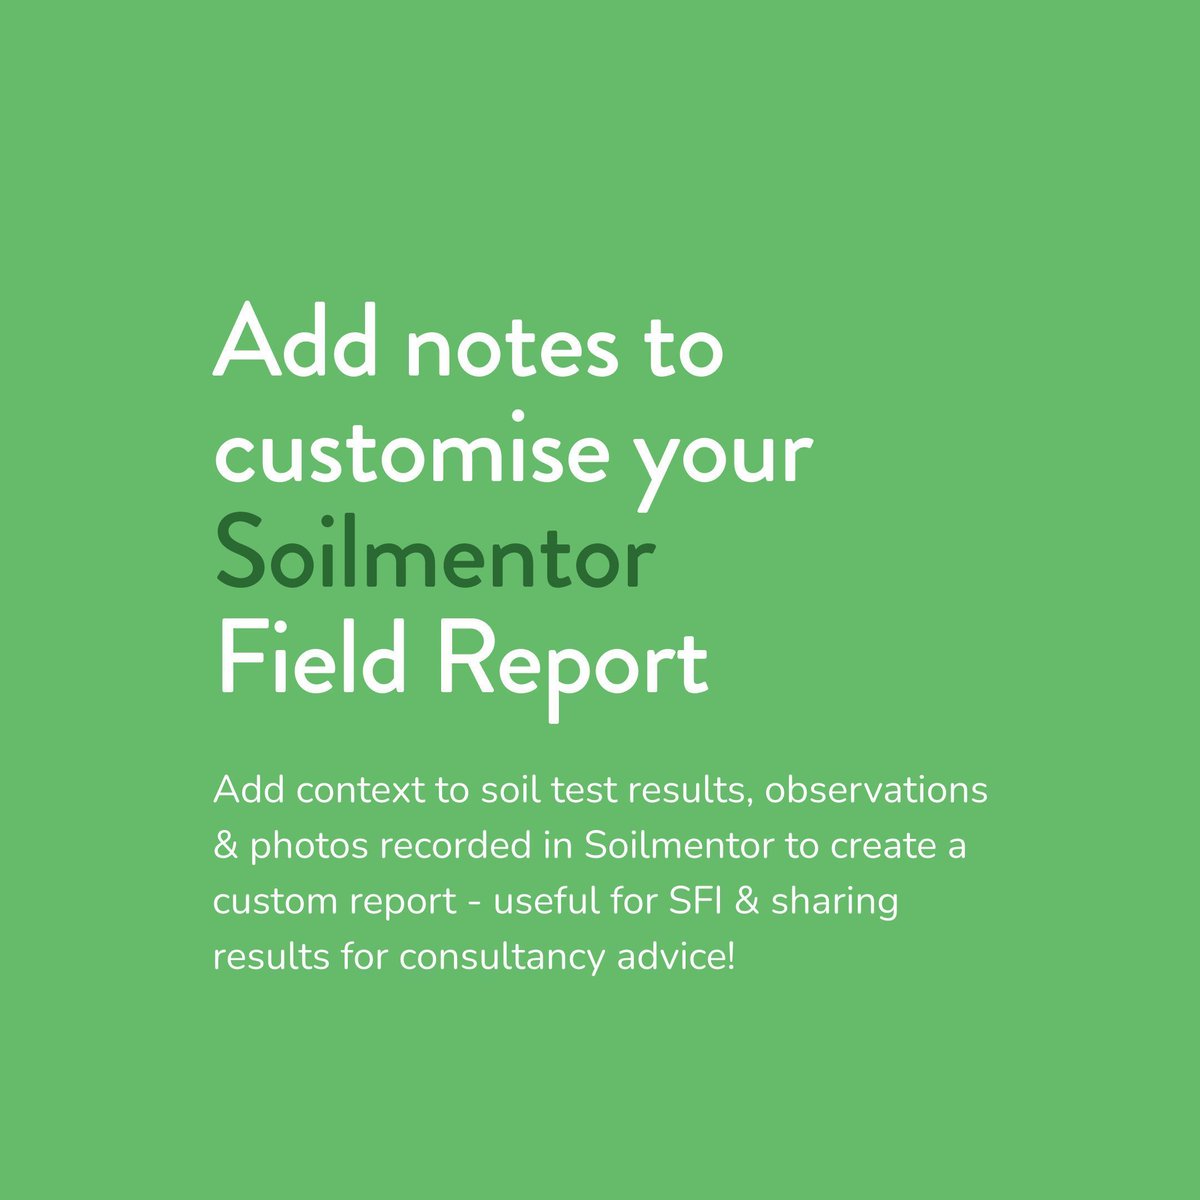 You can now customise your Soilmentor reports to help you collect & share evidence for SFI & more!📋Follow the link below to learn more, or get in touch with us at info@vidacycle.com if you have any questions about Soilmentor - we're always happy to chat! buff.ly/48pLQiJ